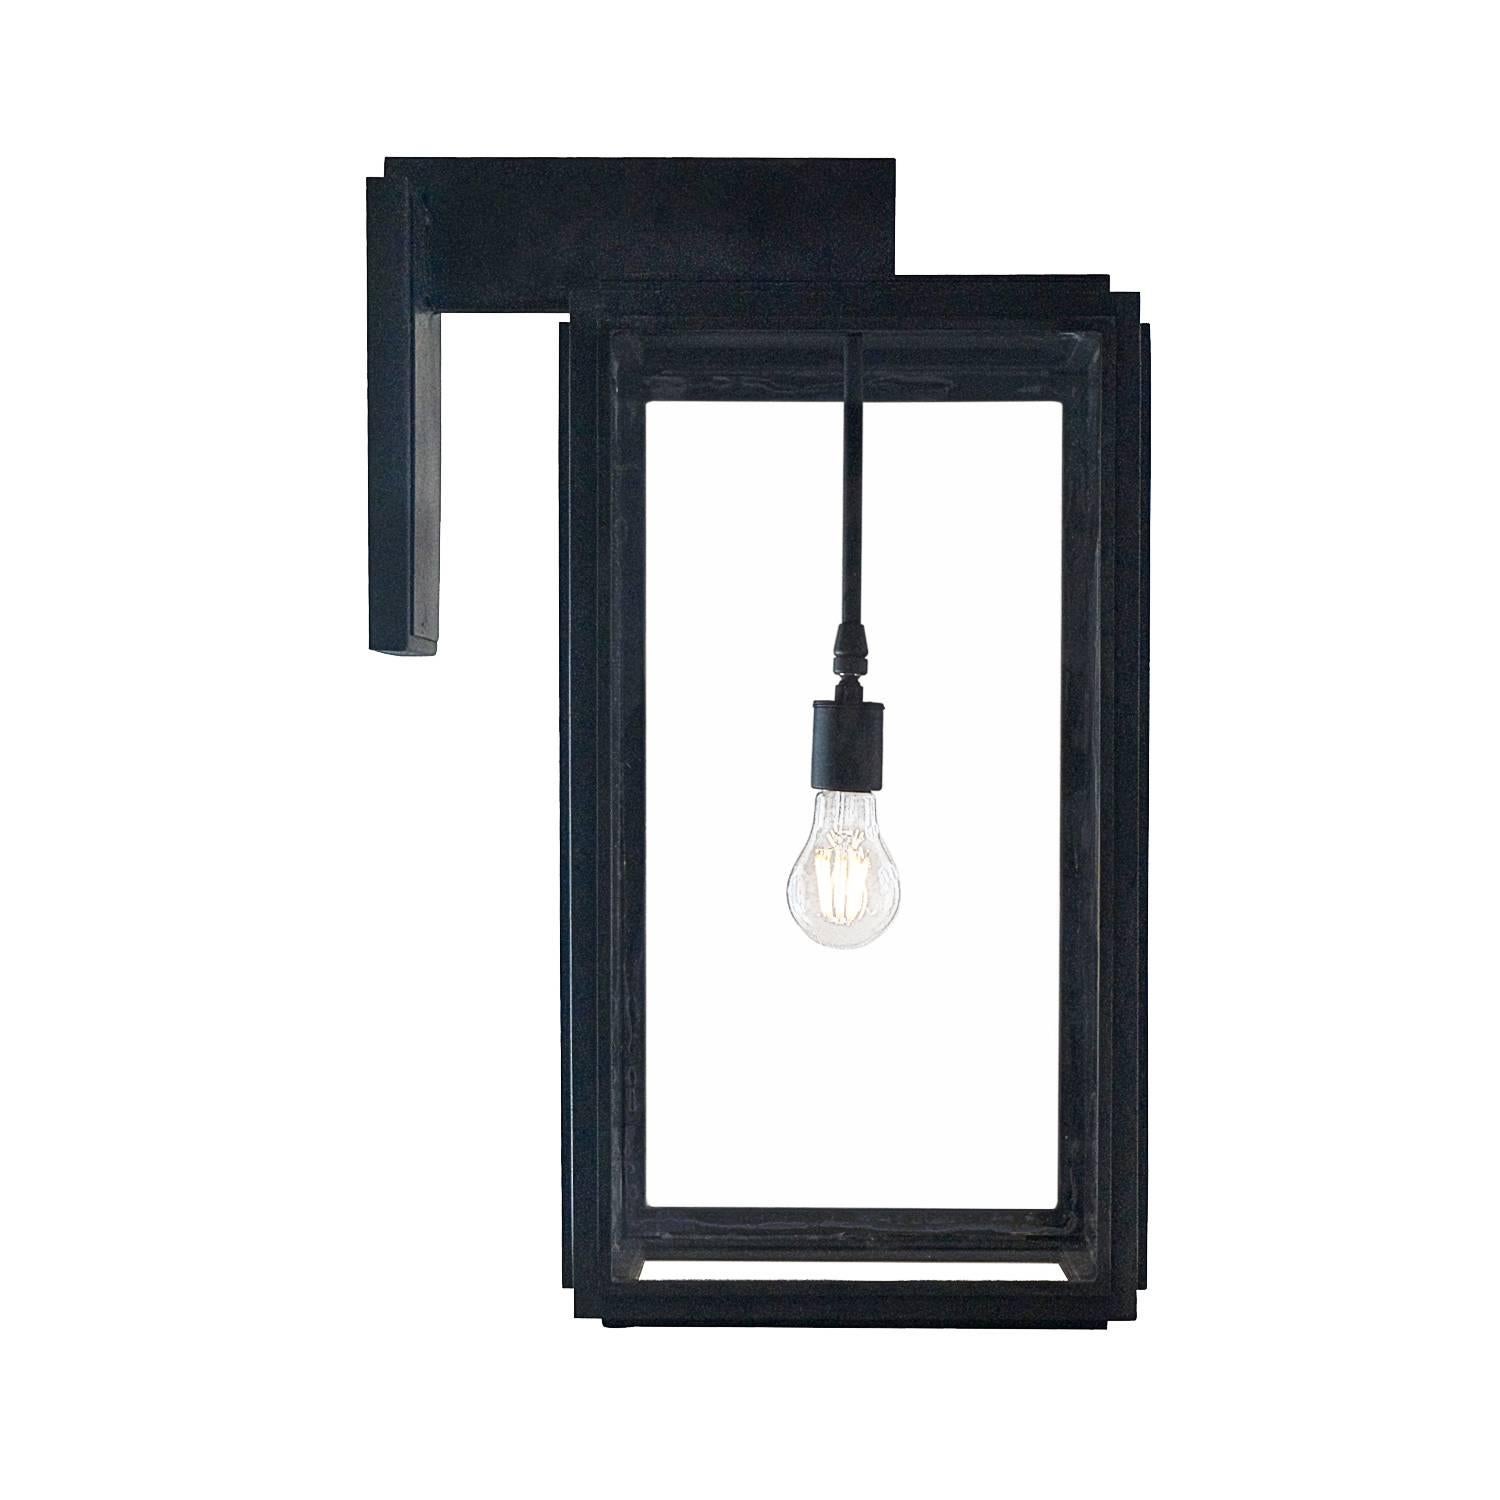 Offering a streamline contemporary design the Bel Air lantern was inspired by a Classic modern estate in Bel Air. It incorporates a modern look with a modern day handmade quality.

Lantern shown in SBLC Grey Finish with SBLC Clear Glass.